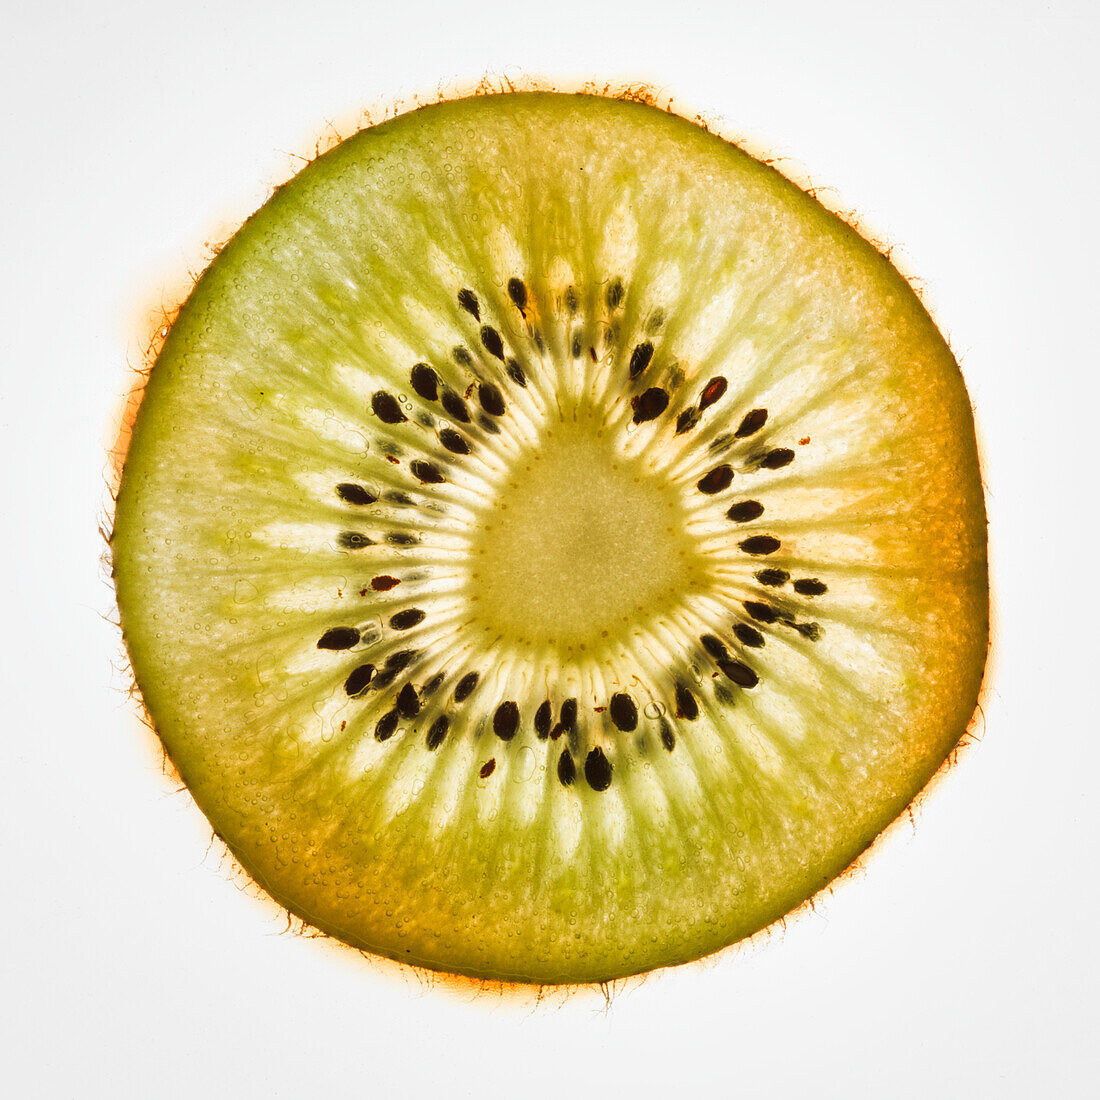 A kiwi slice in the transmitted light